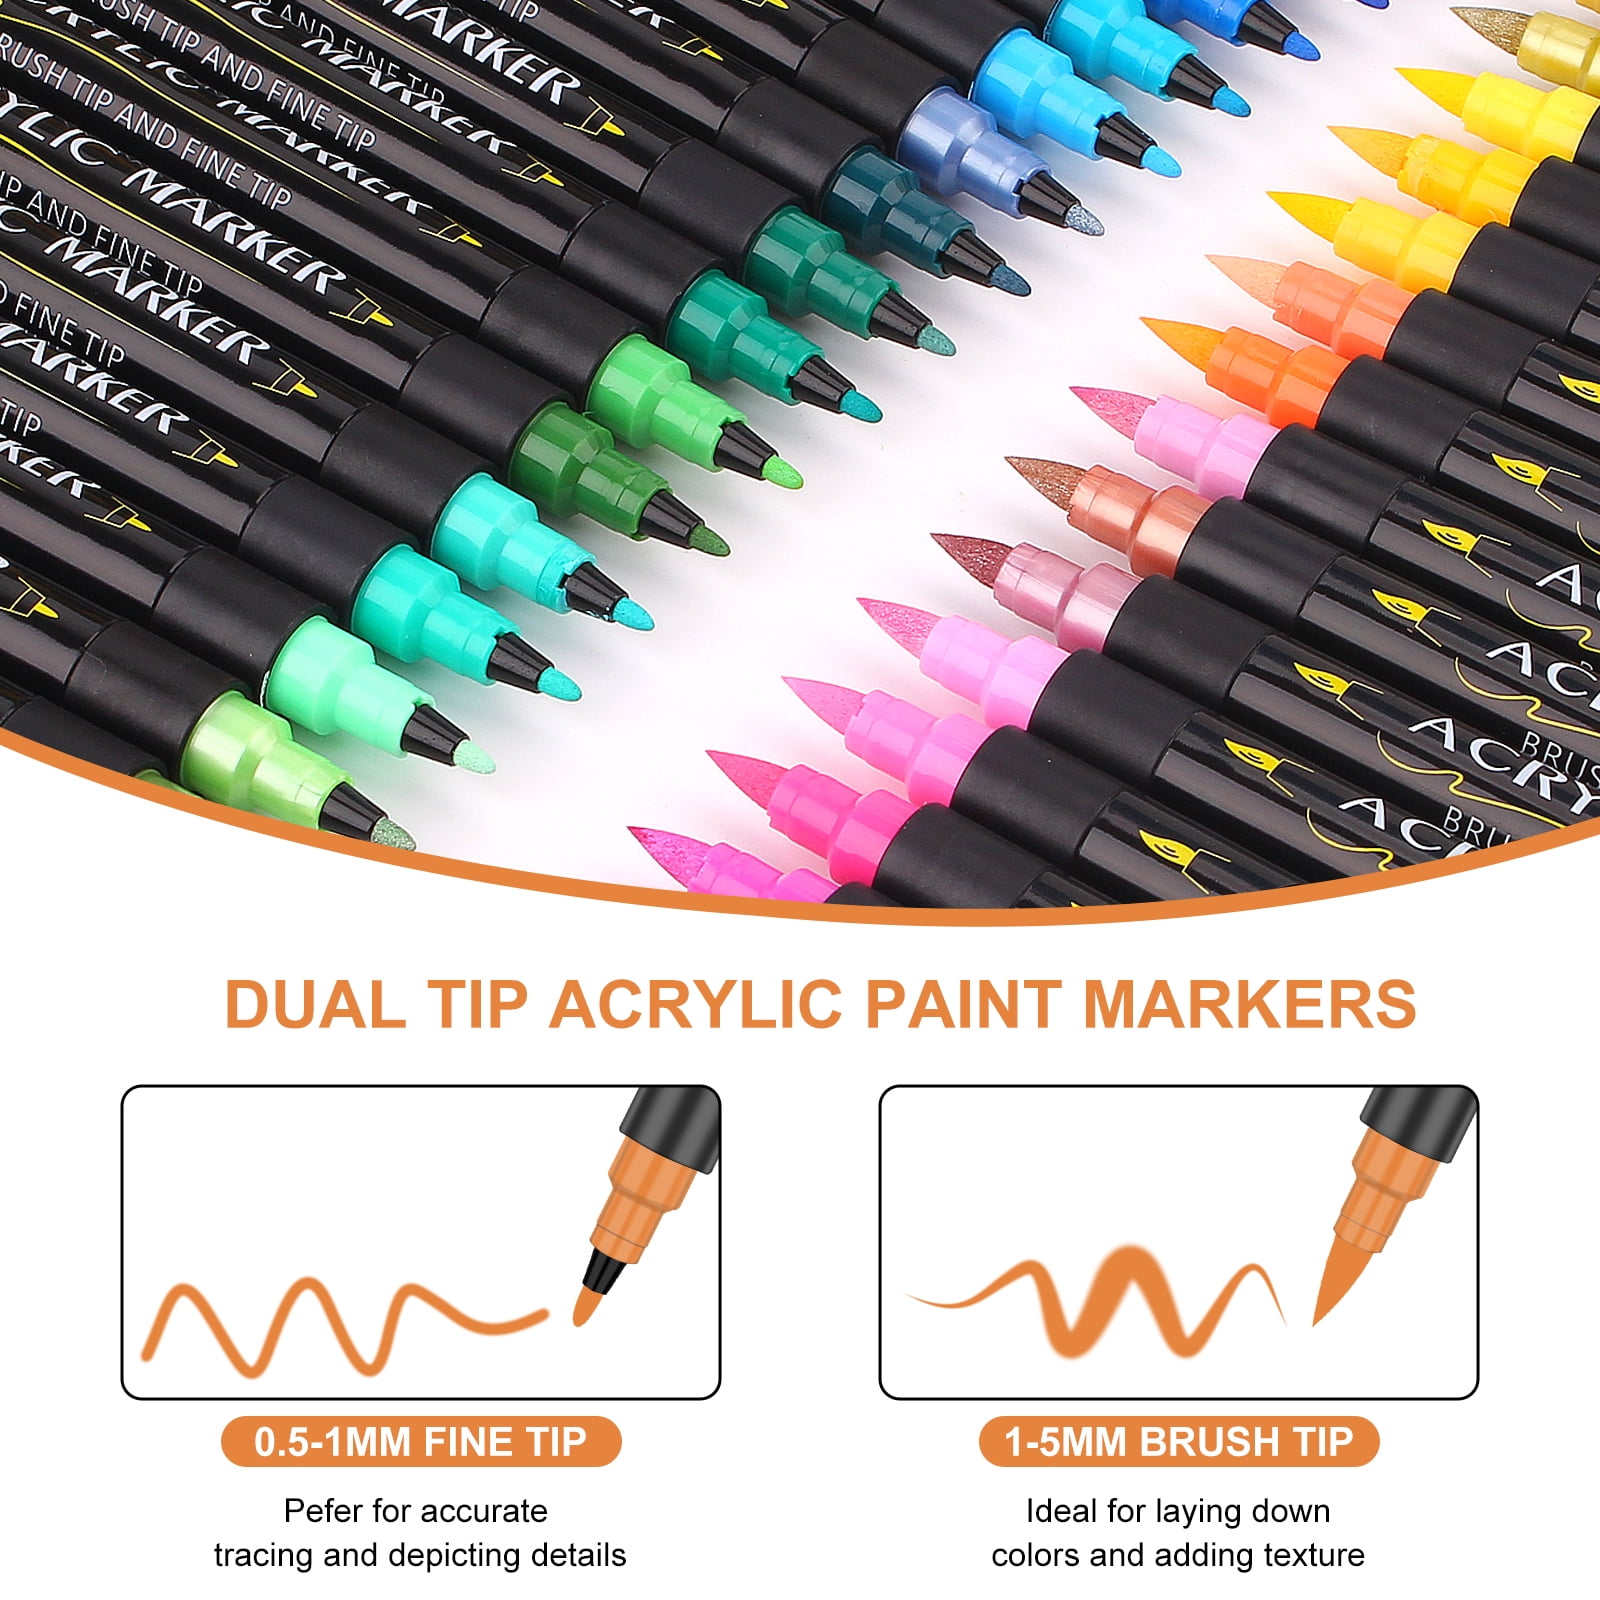 Artugn 24 Colors Acrylic Paint Pens Dual Tip Pens with Medium Tip and Brush Tip Paint Markers for Rock Painting Ceramic Wood Plastic Calligraphy Scrap